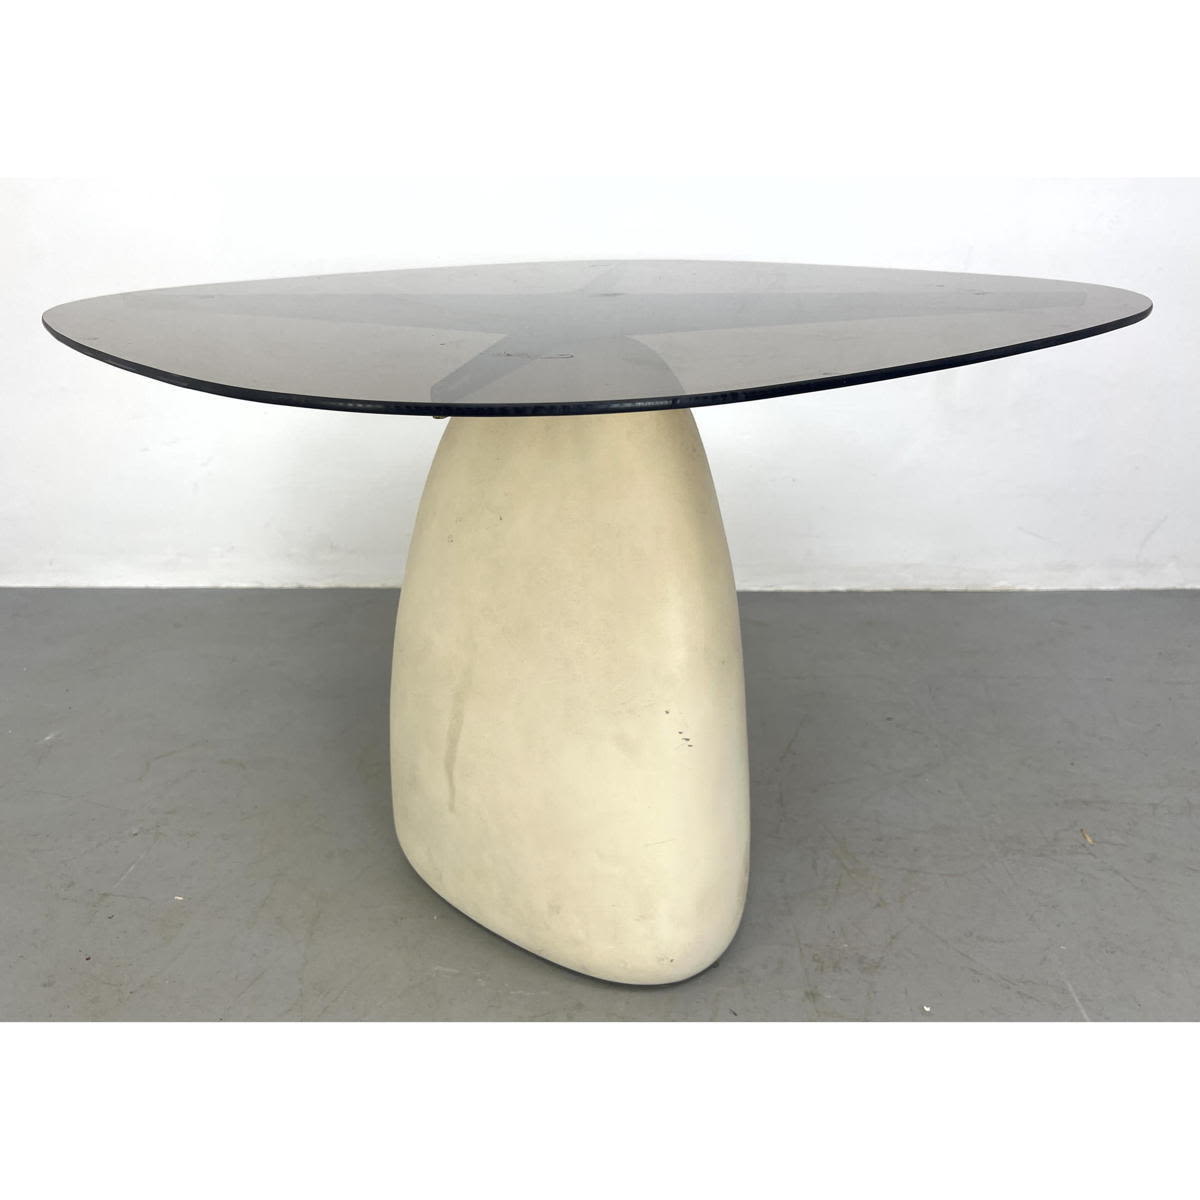 Heavy Rock Form Pedestal Dining Table